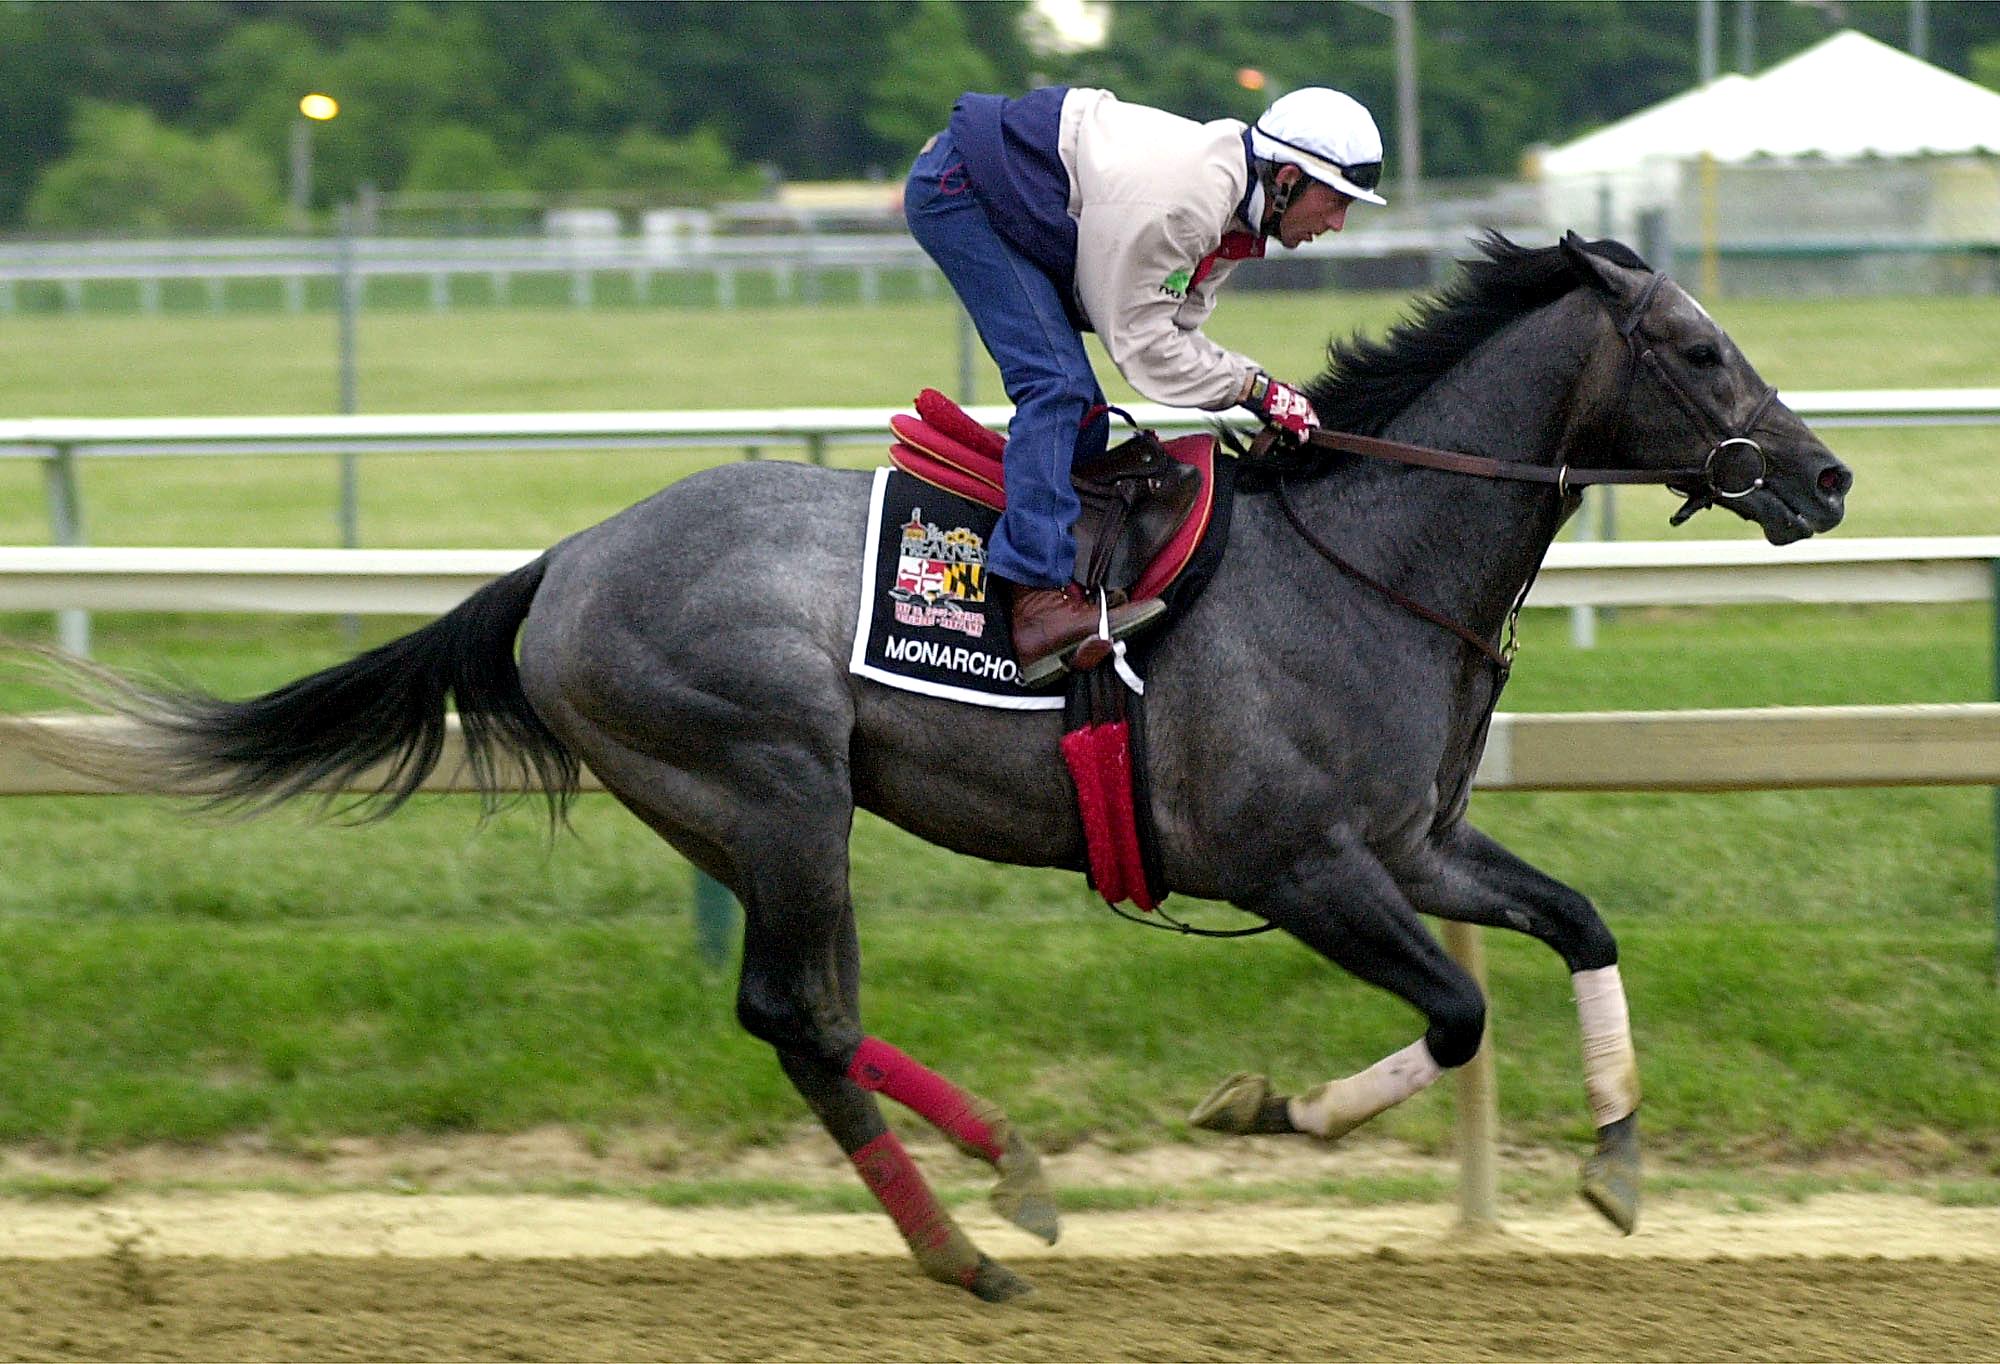  Bryan Beccia, exercise rider, takes the Kentucky Derby winner, Monarchos, for a gallop 